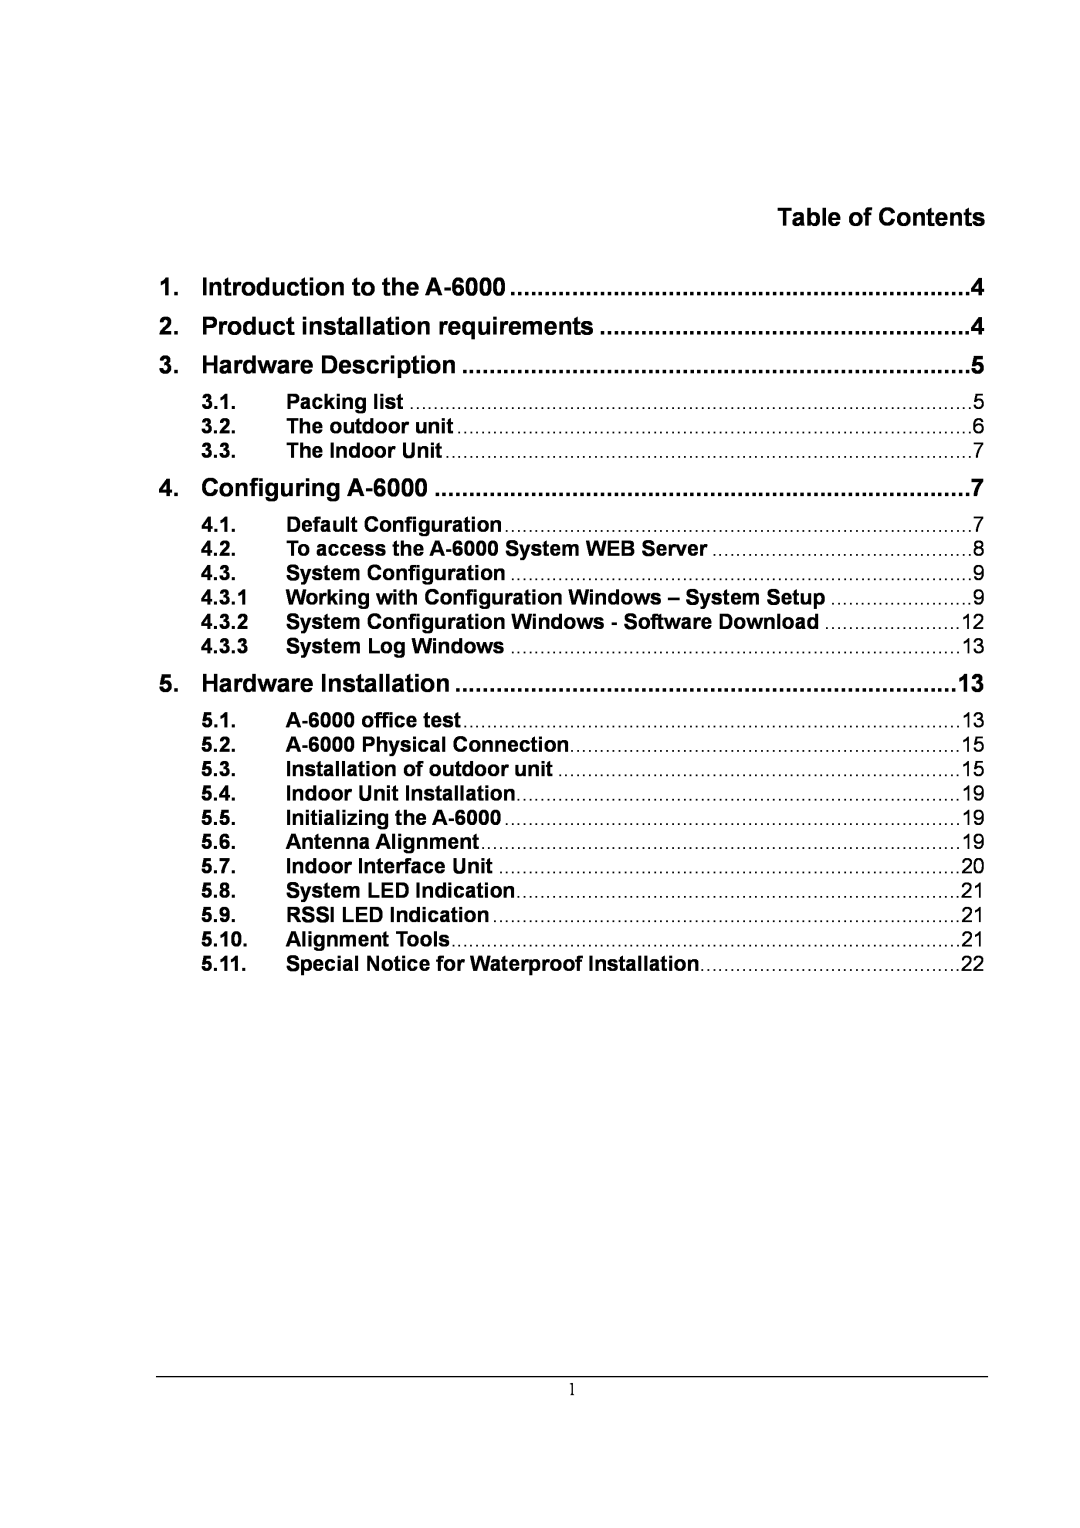 ZyXEL Communications Table of Contents, Hardware Installation, Introduction to the A-6000, Hardware Description 